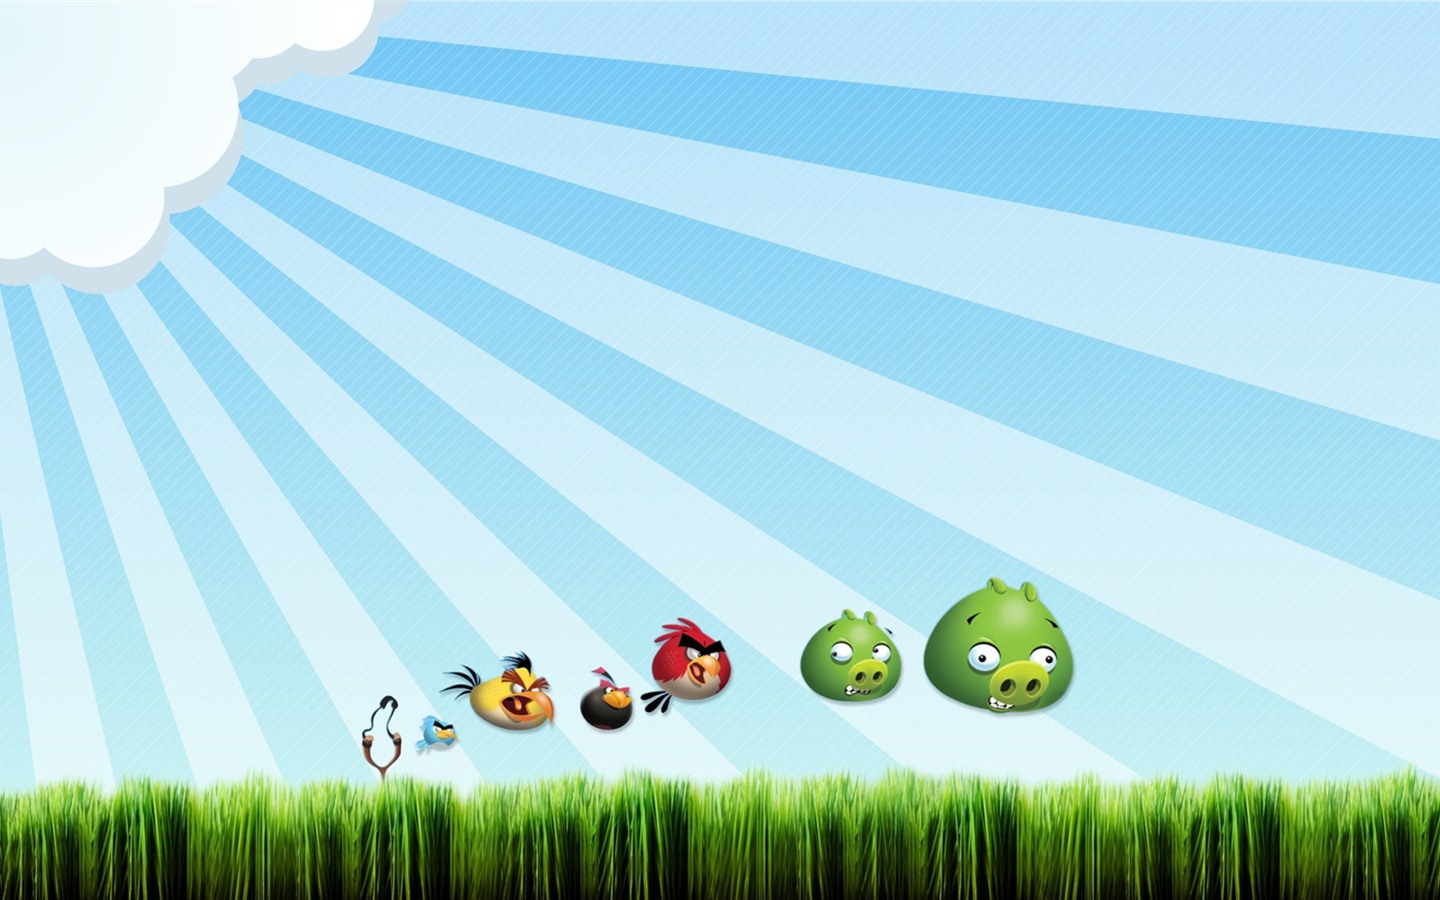 Angry Birds Game Wallpapers #4 - 1440x900